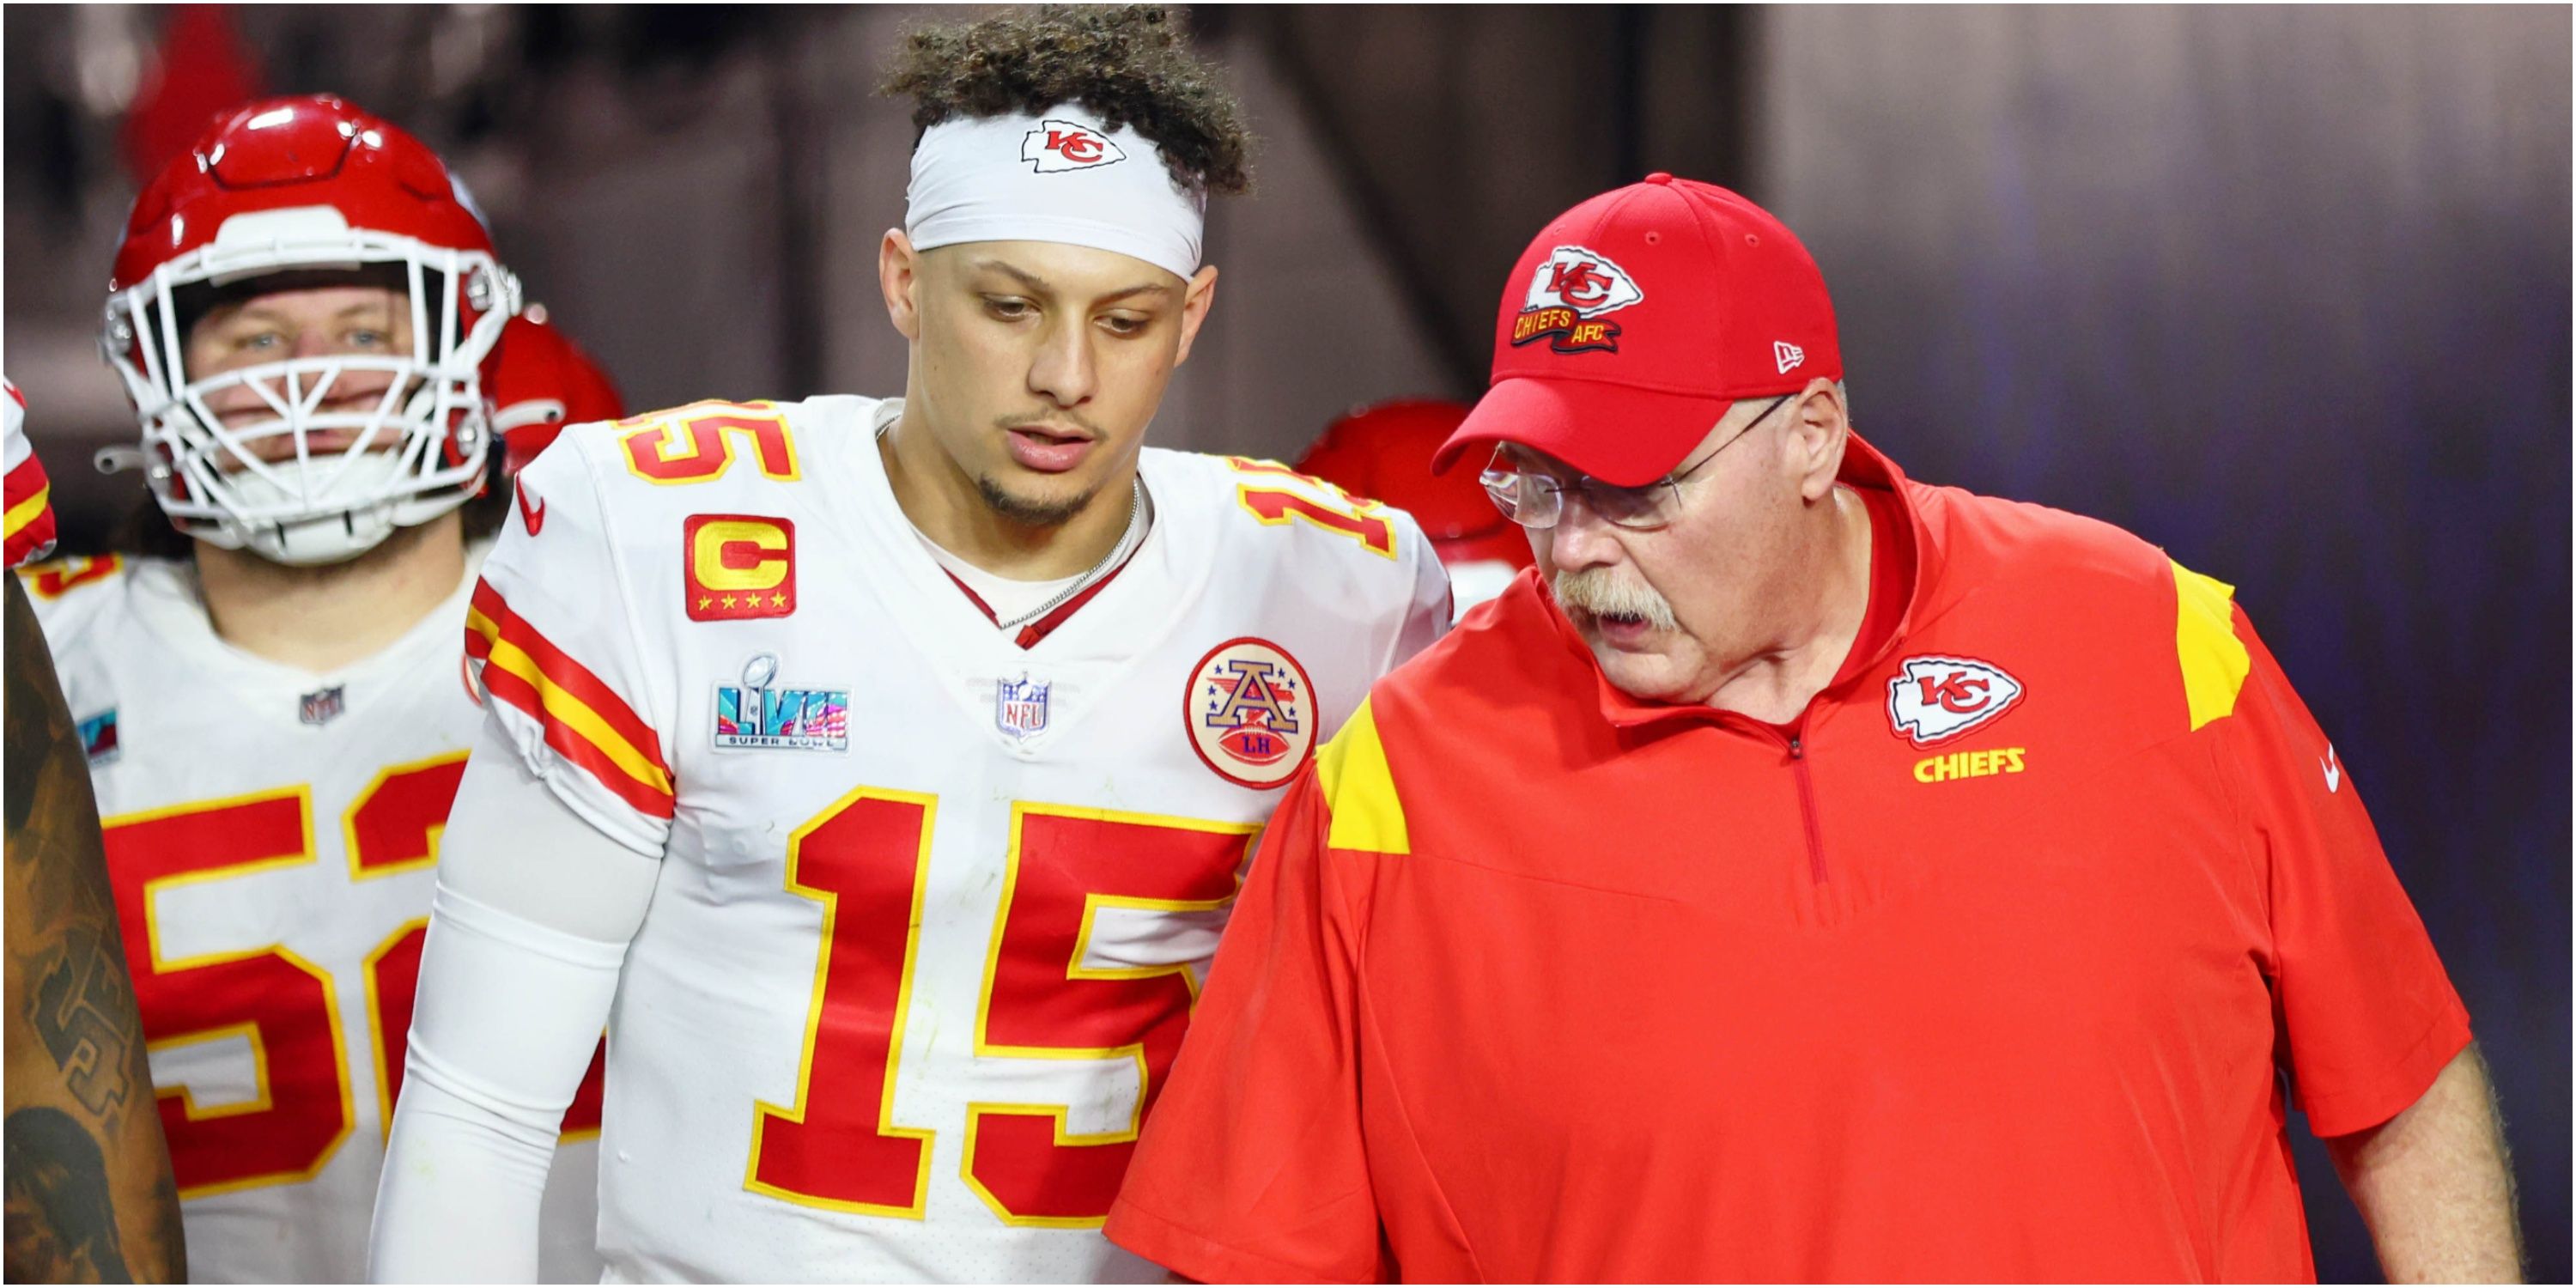 Chiefs-Dolphins playoff preview: Key matchups, betting odds, injury reports